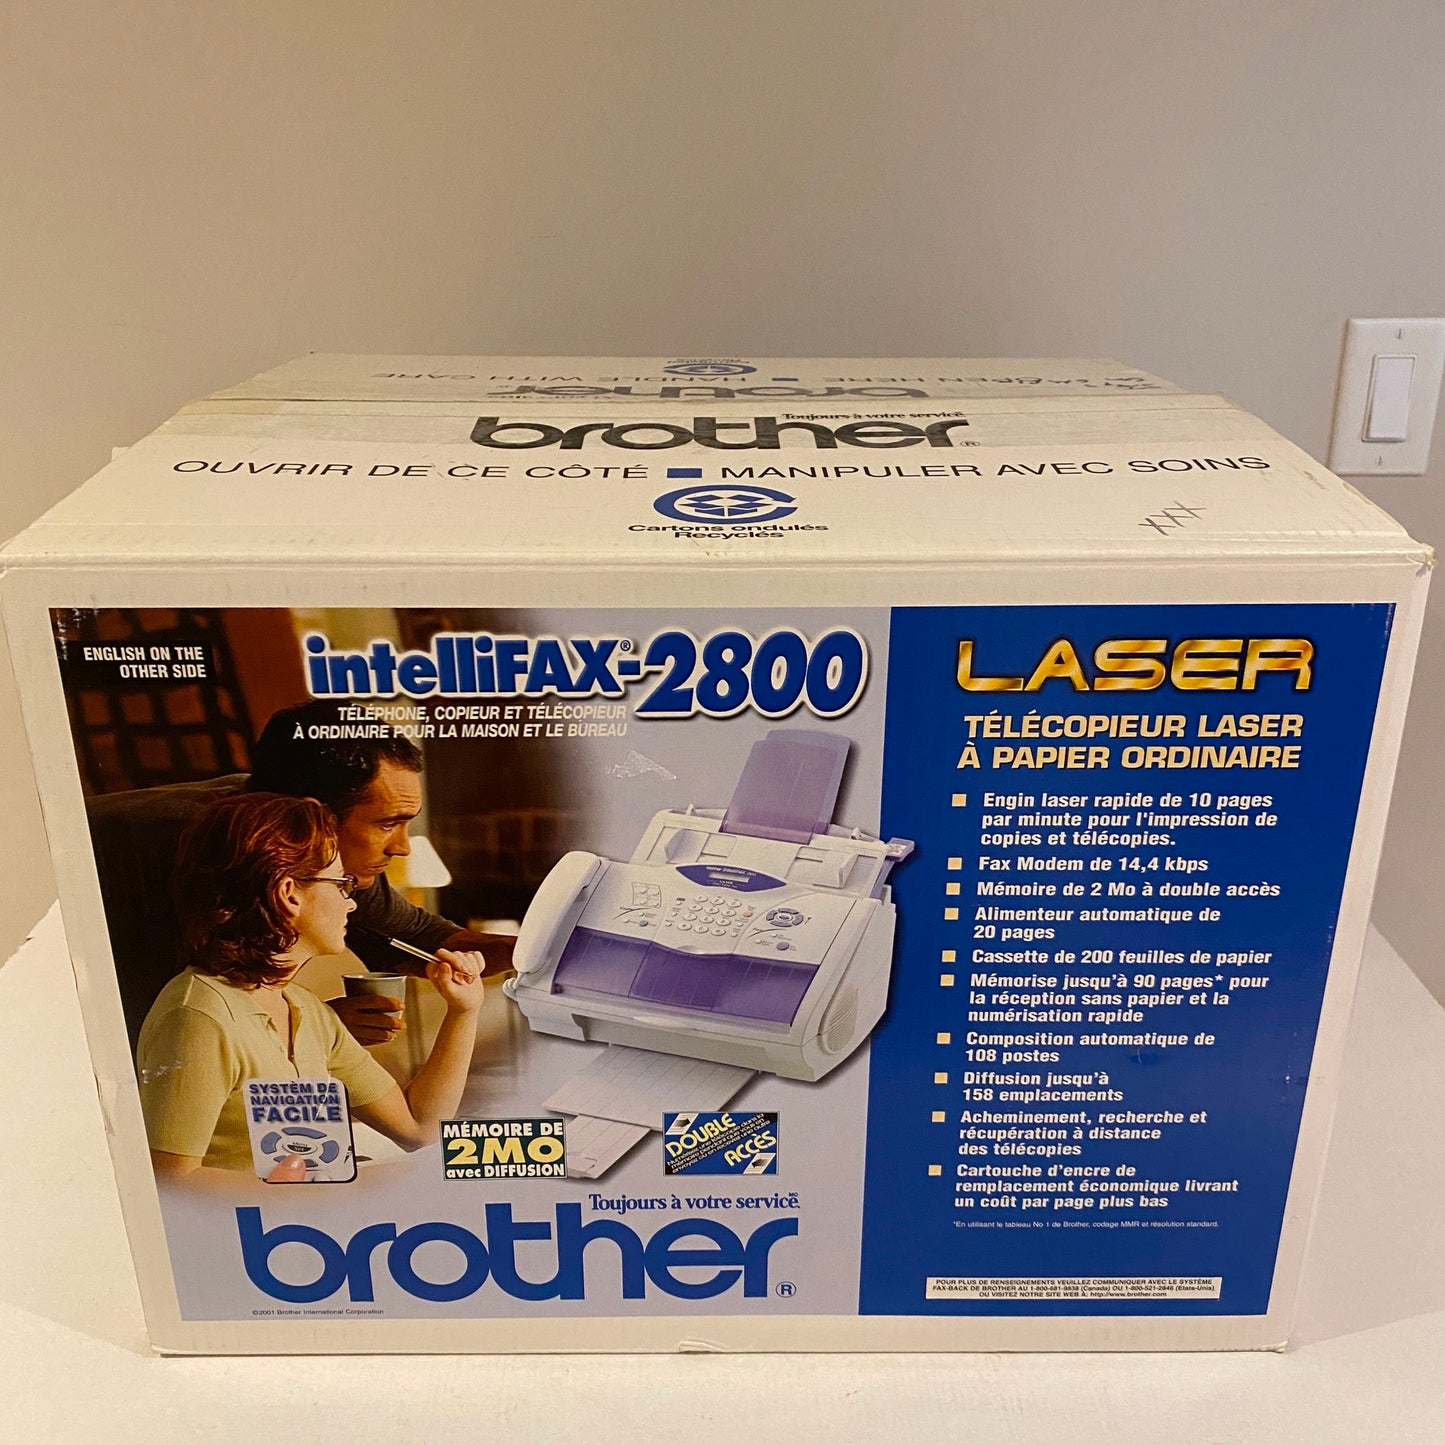 New - Brother IntelliFAX-2800 Plain Paper Laser Fax Machine